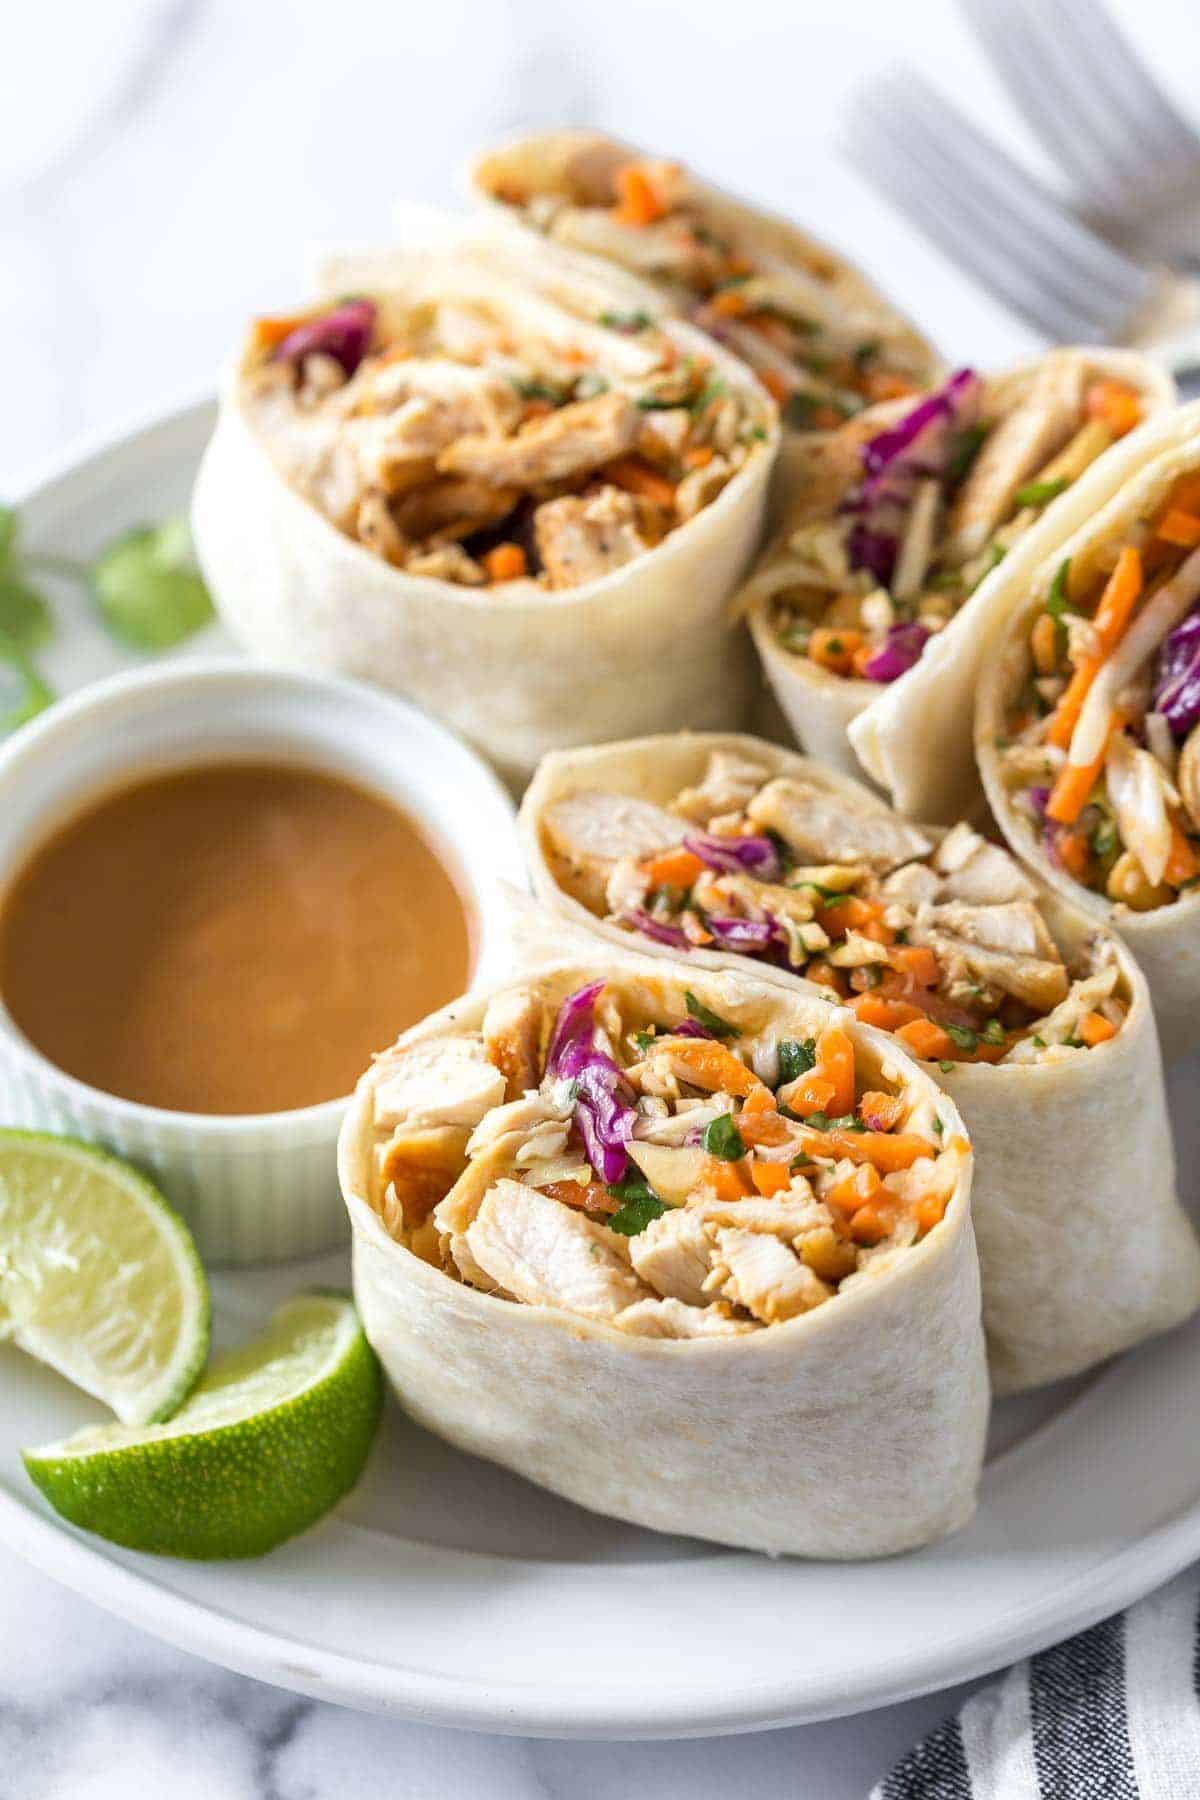 Delicious asian wraps with peanut butter sauce on a white tray.